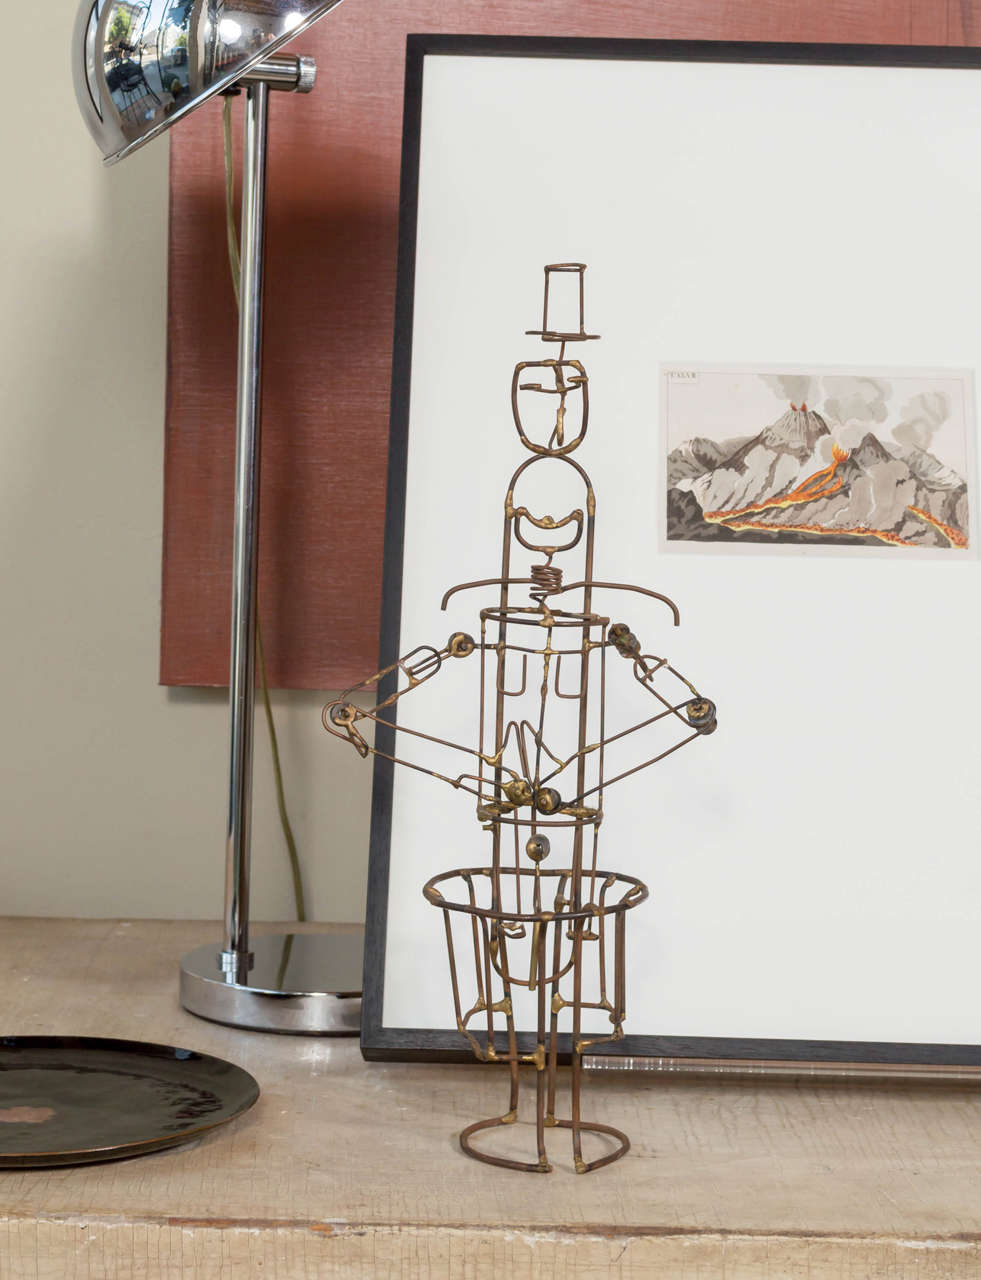 A figural wire Sculpture of what looks to be a chimney sweep with top hat that moves to raise and lower arms and jaw.